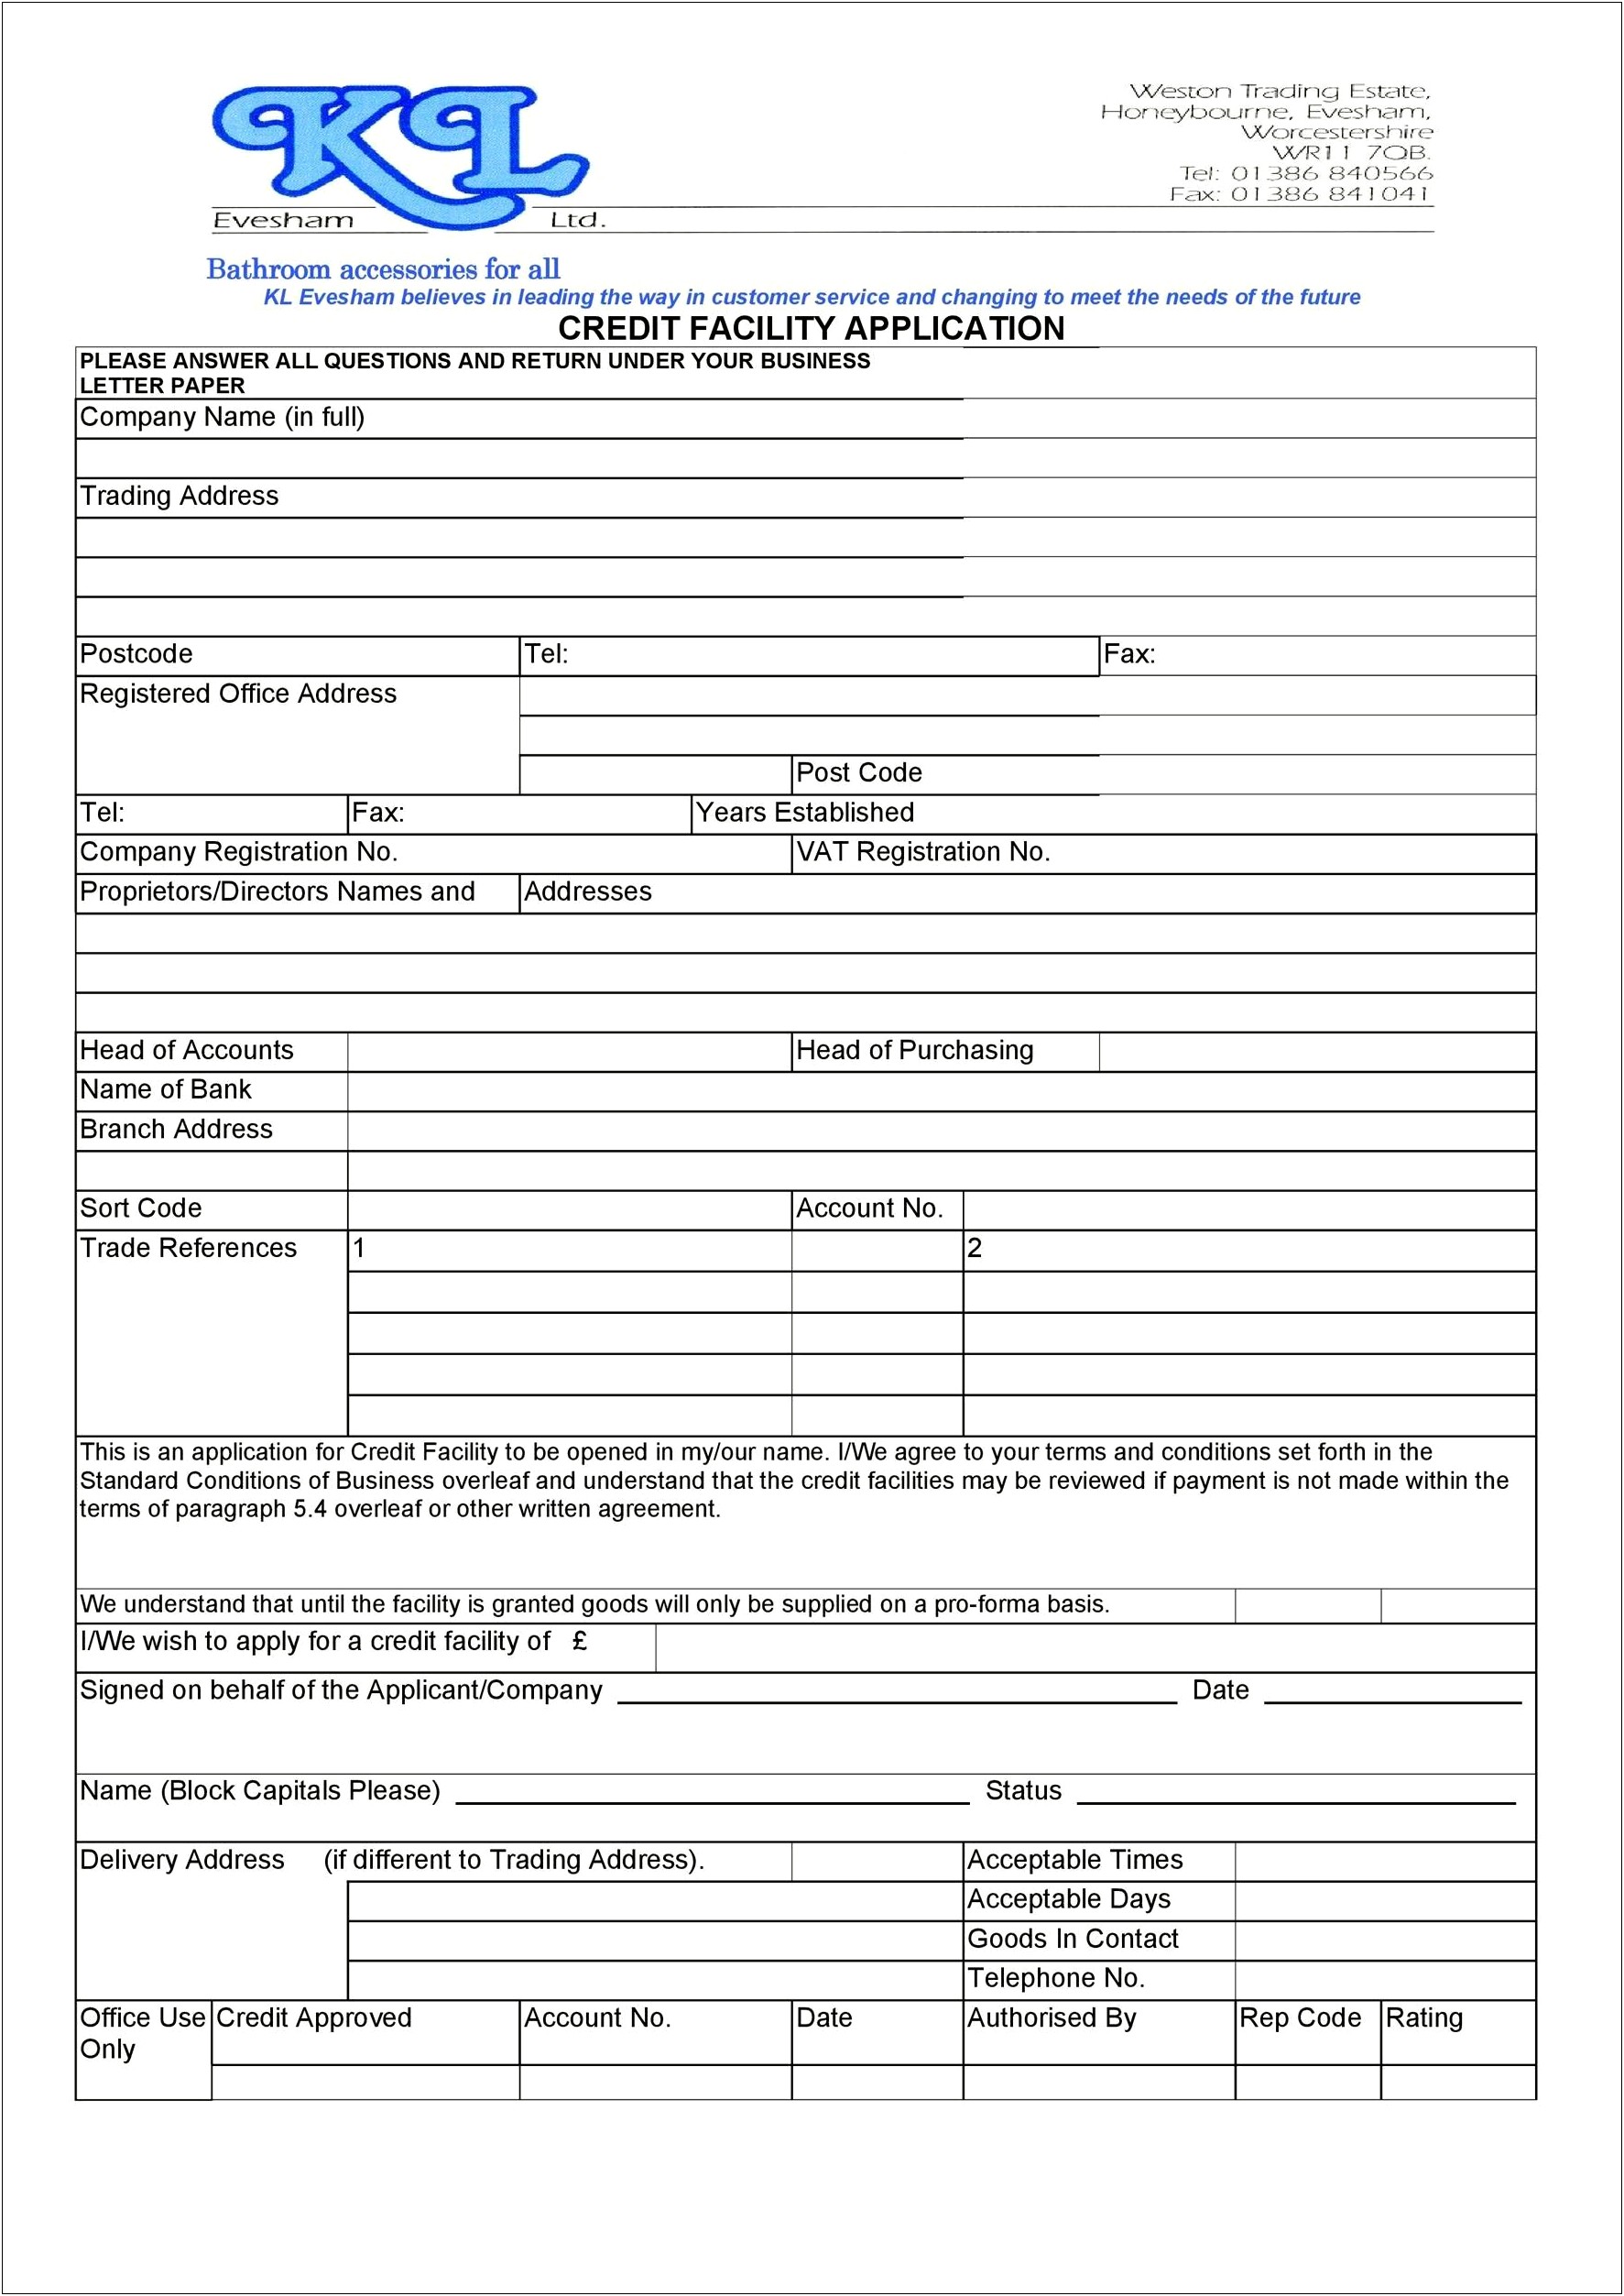 Business Credit Application Form Template Free Uk